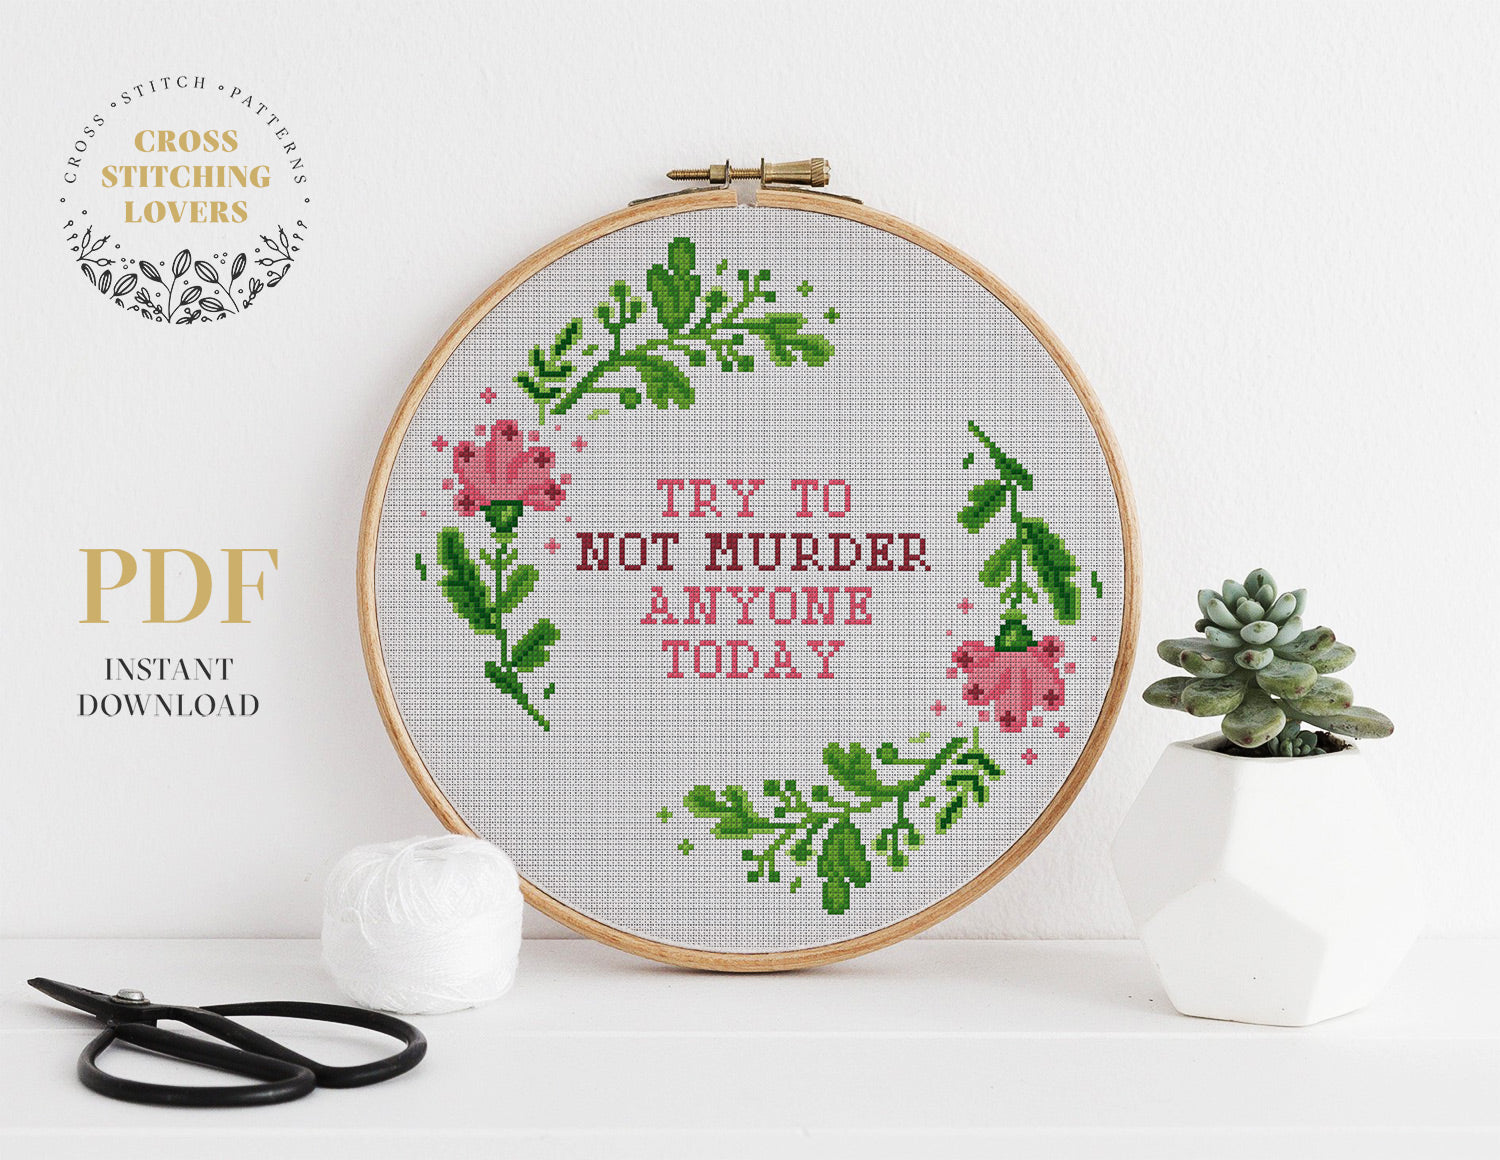 TRY TO NOT MURDER ANYONE TODAY  -  Funny Cross stitch pattern